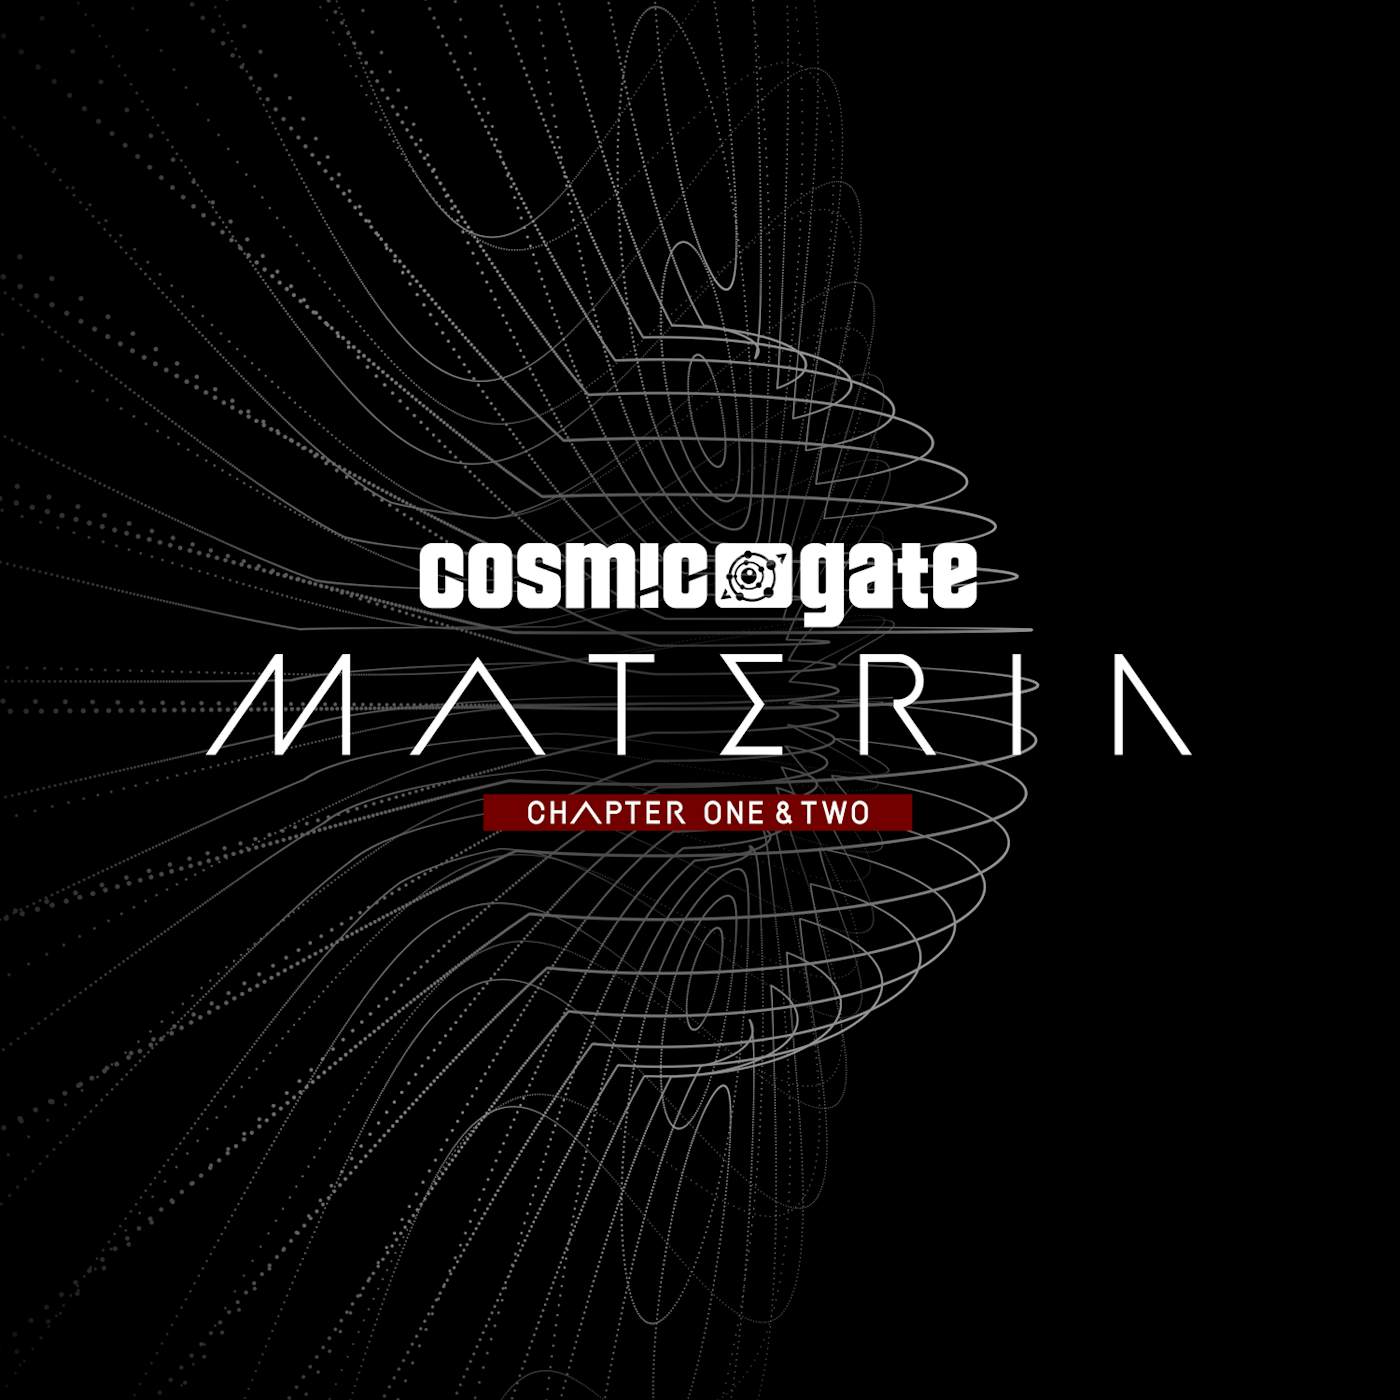 Cosmic Gate MATERIA CHAPTER ONE & TWO CD